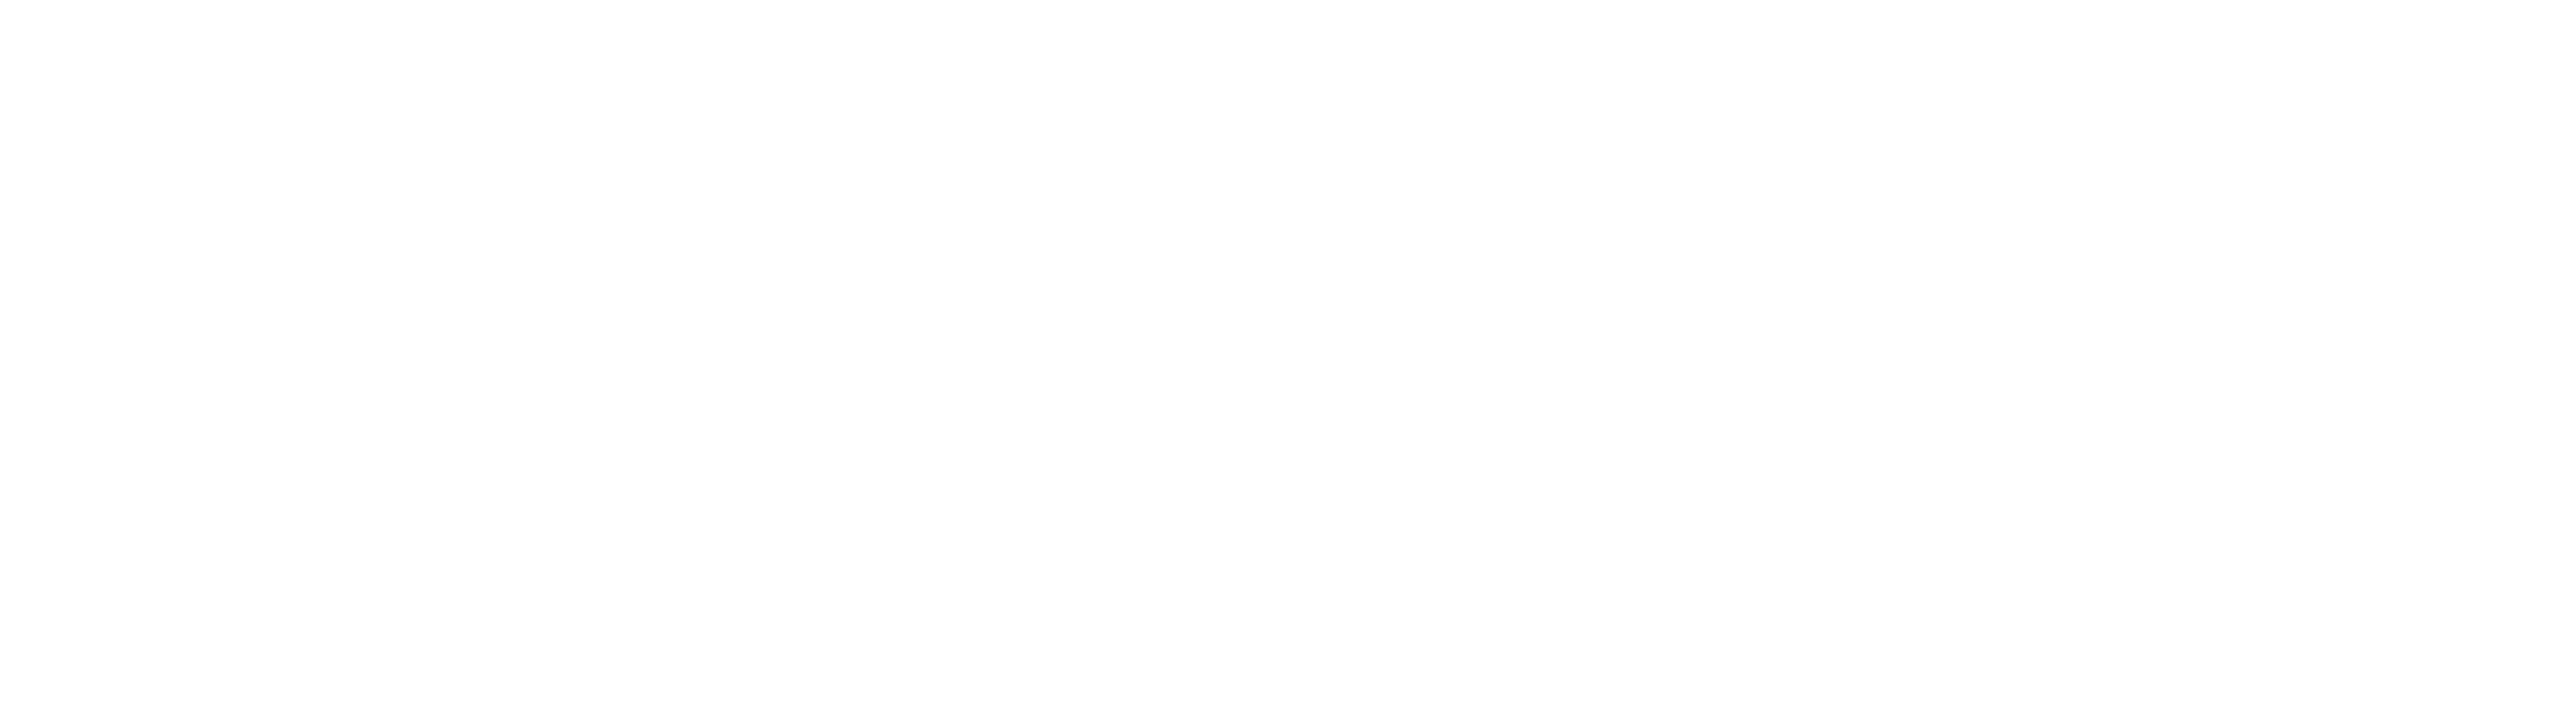 Shoulder Innovations white logo with a transparent background.